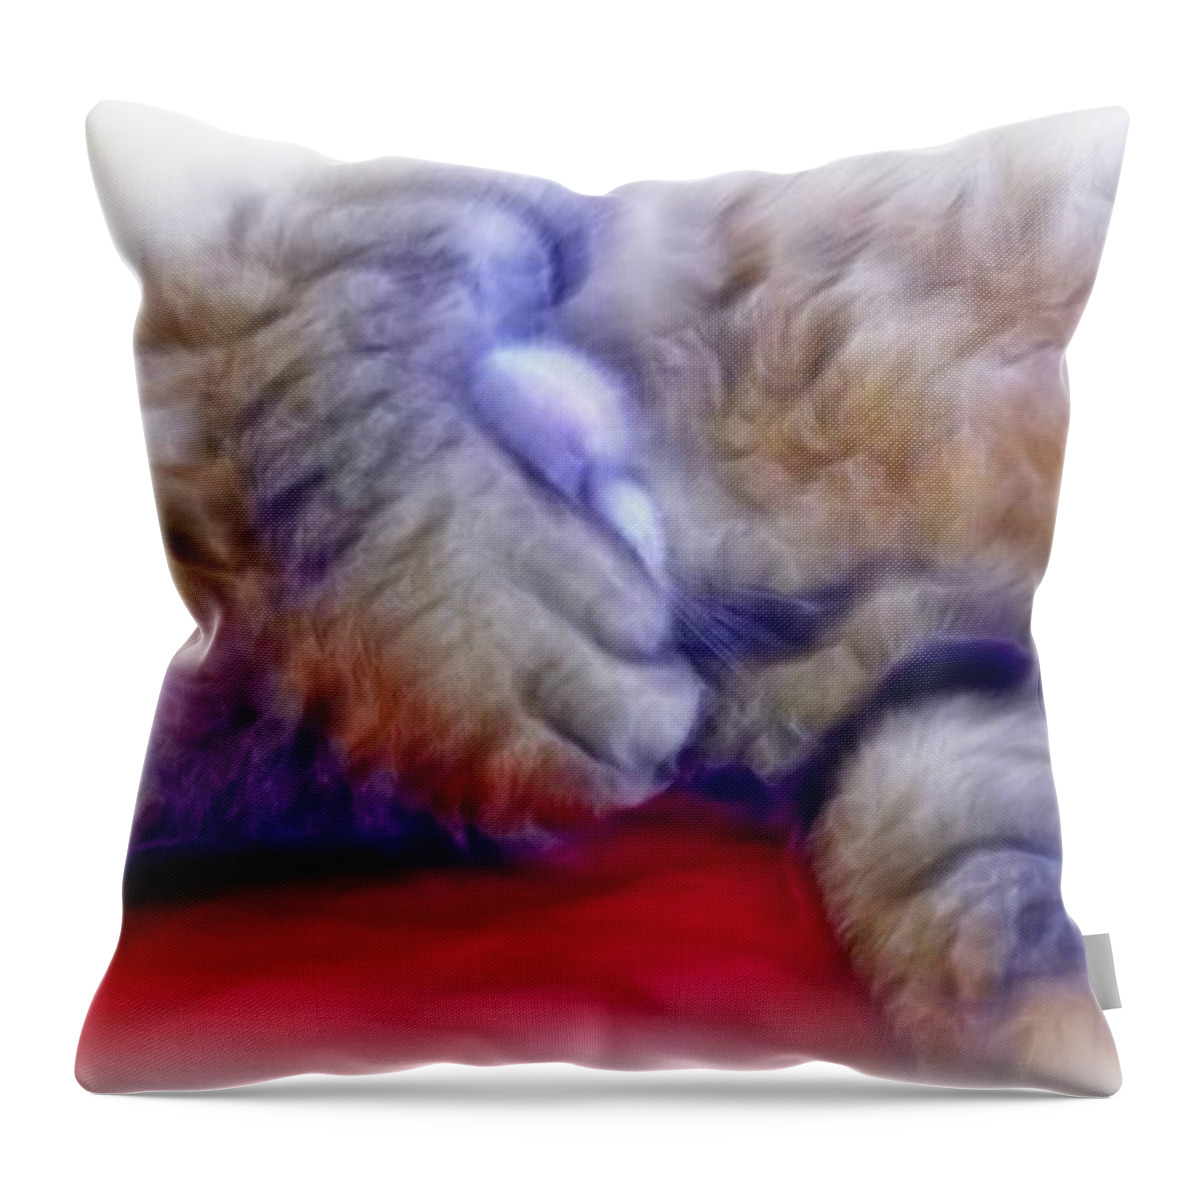 Cat Throw Pillow featuring the photograph Camera Shy Kitty by Lilia D